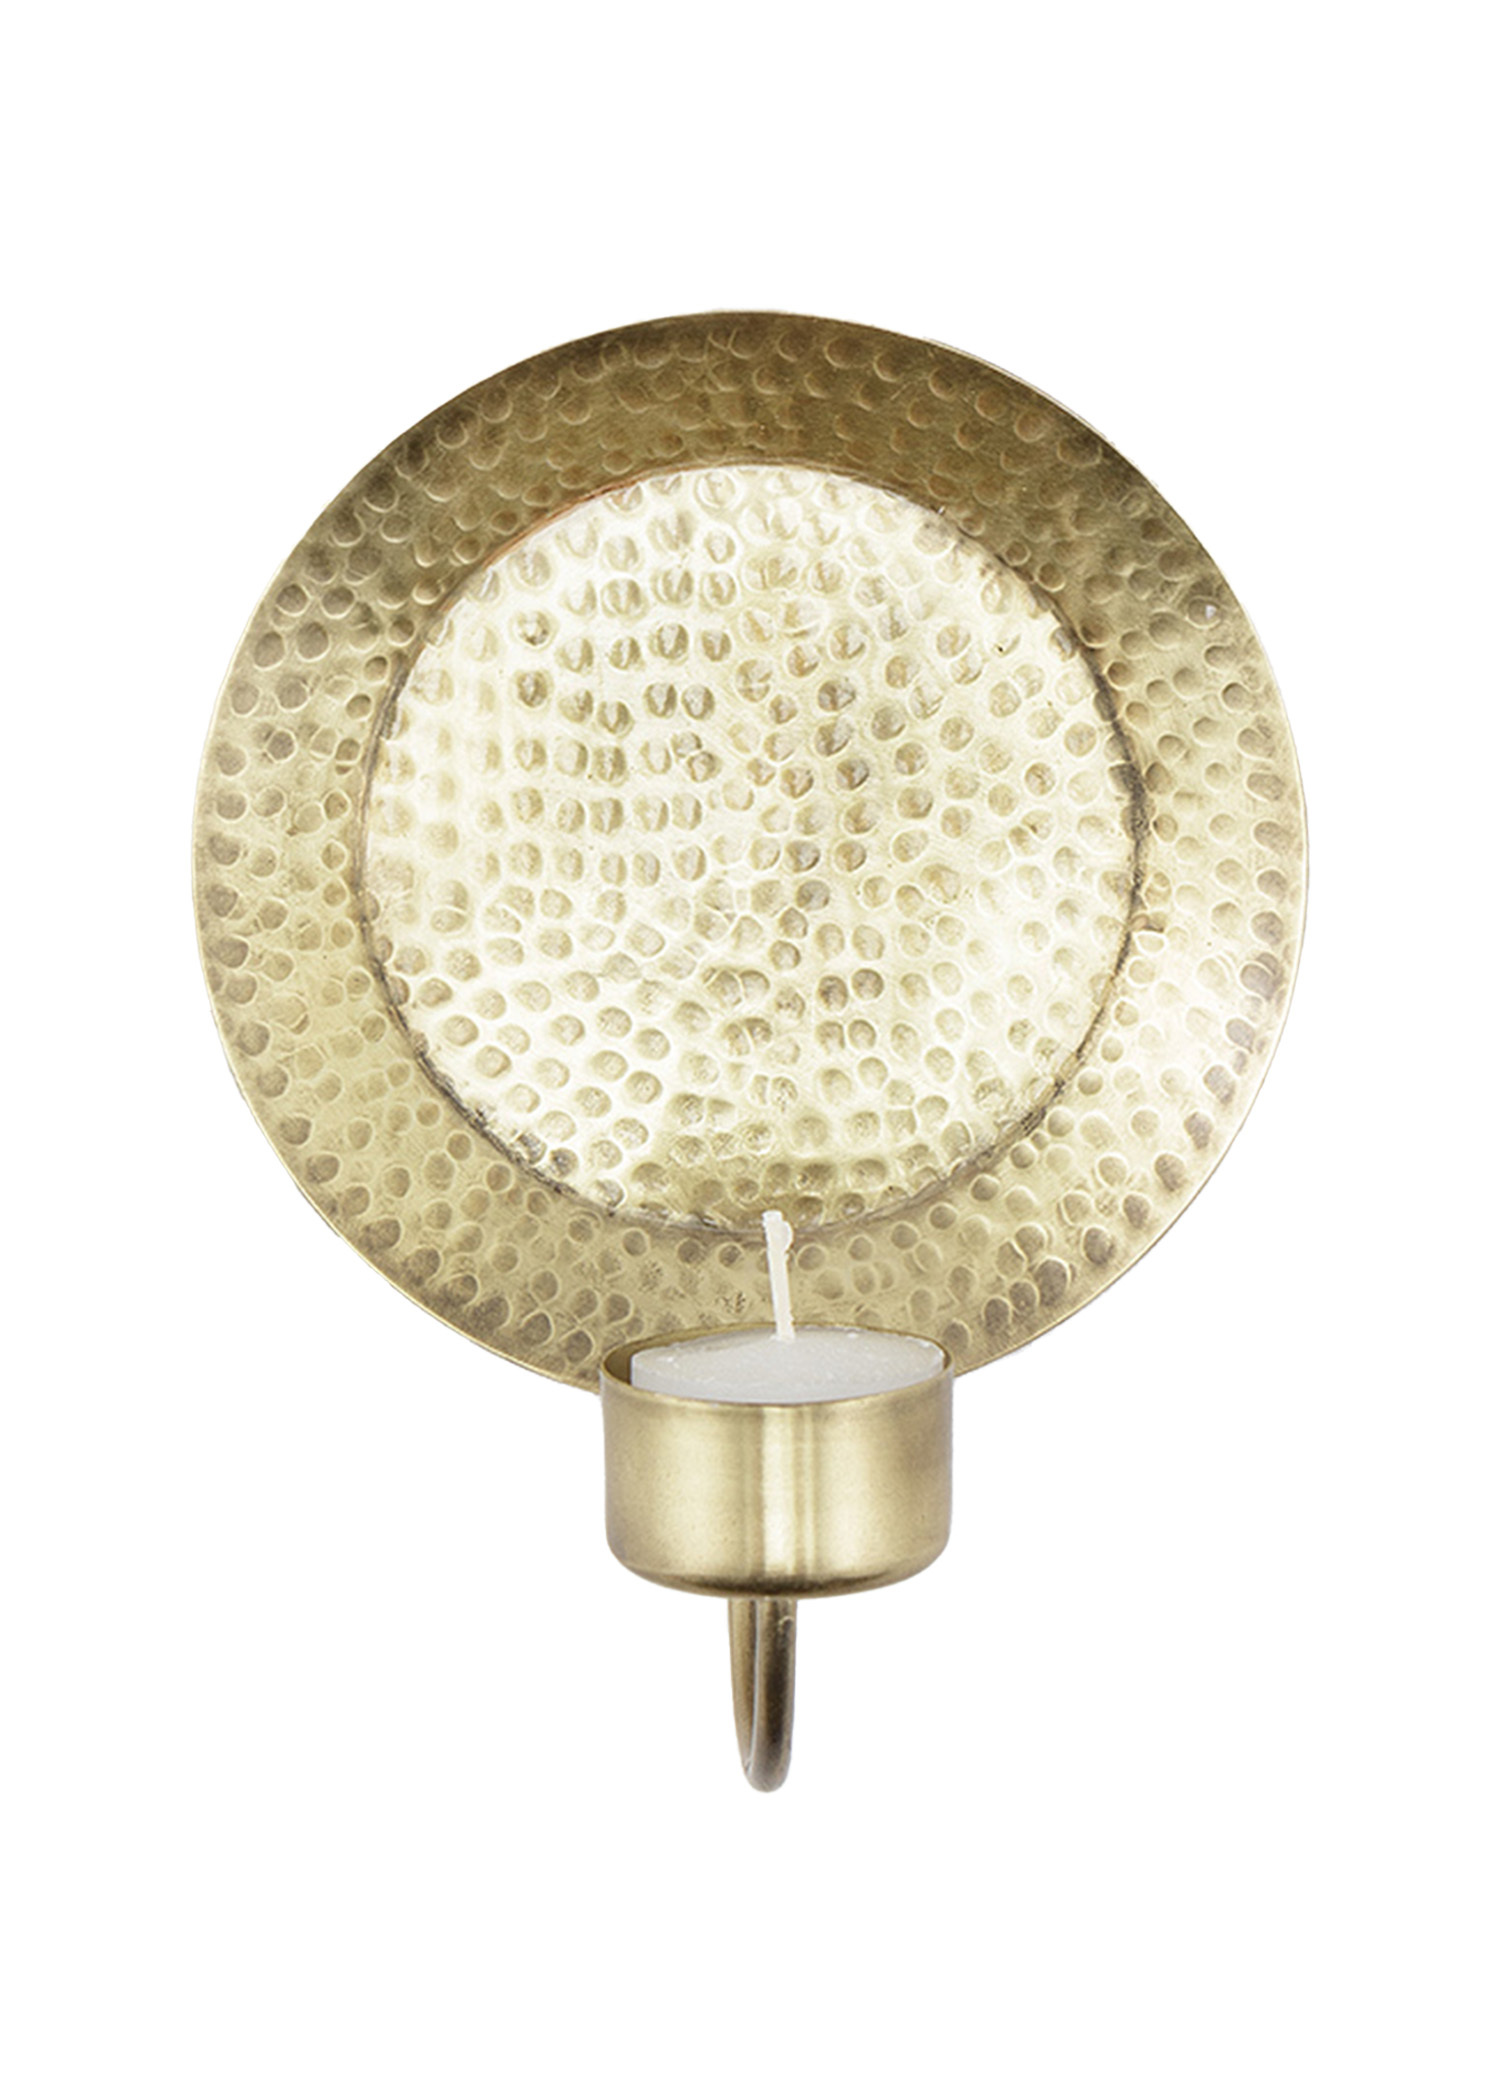 Small wall sconce